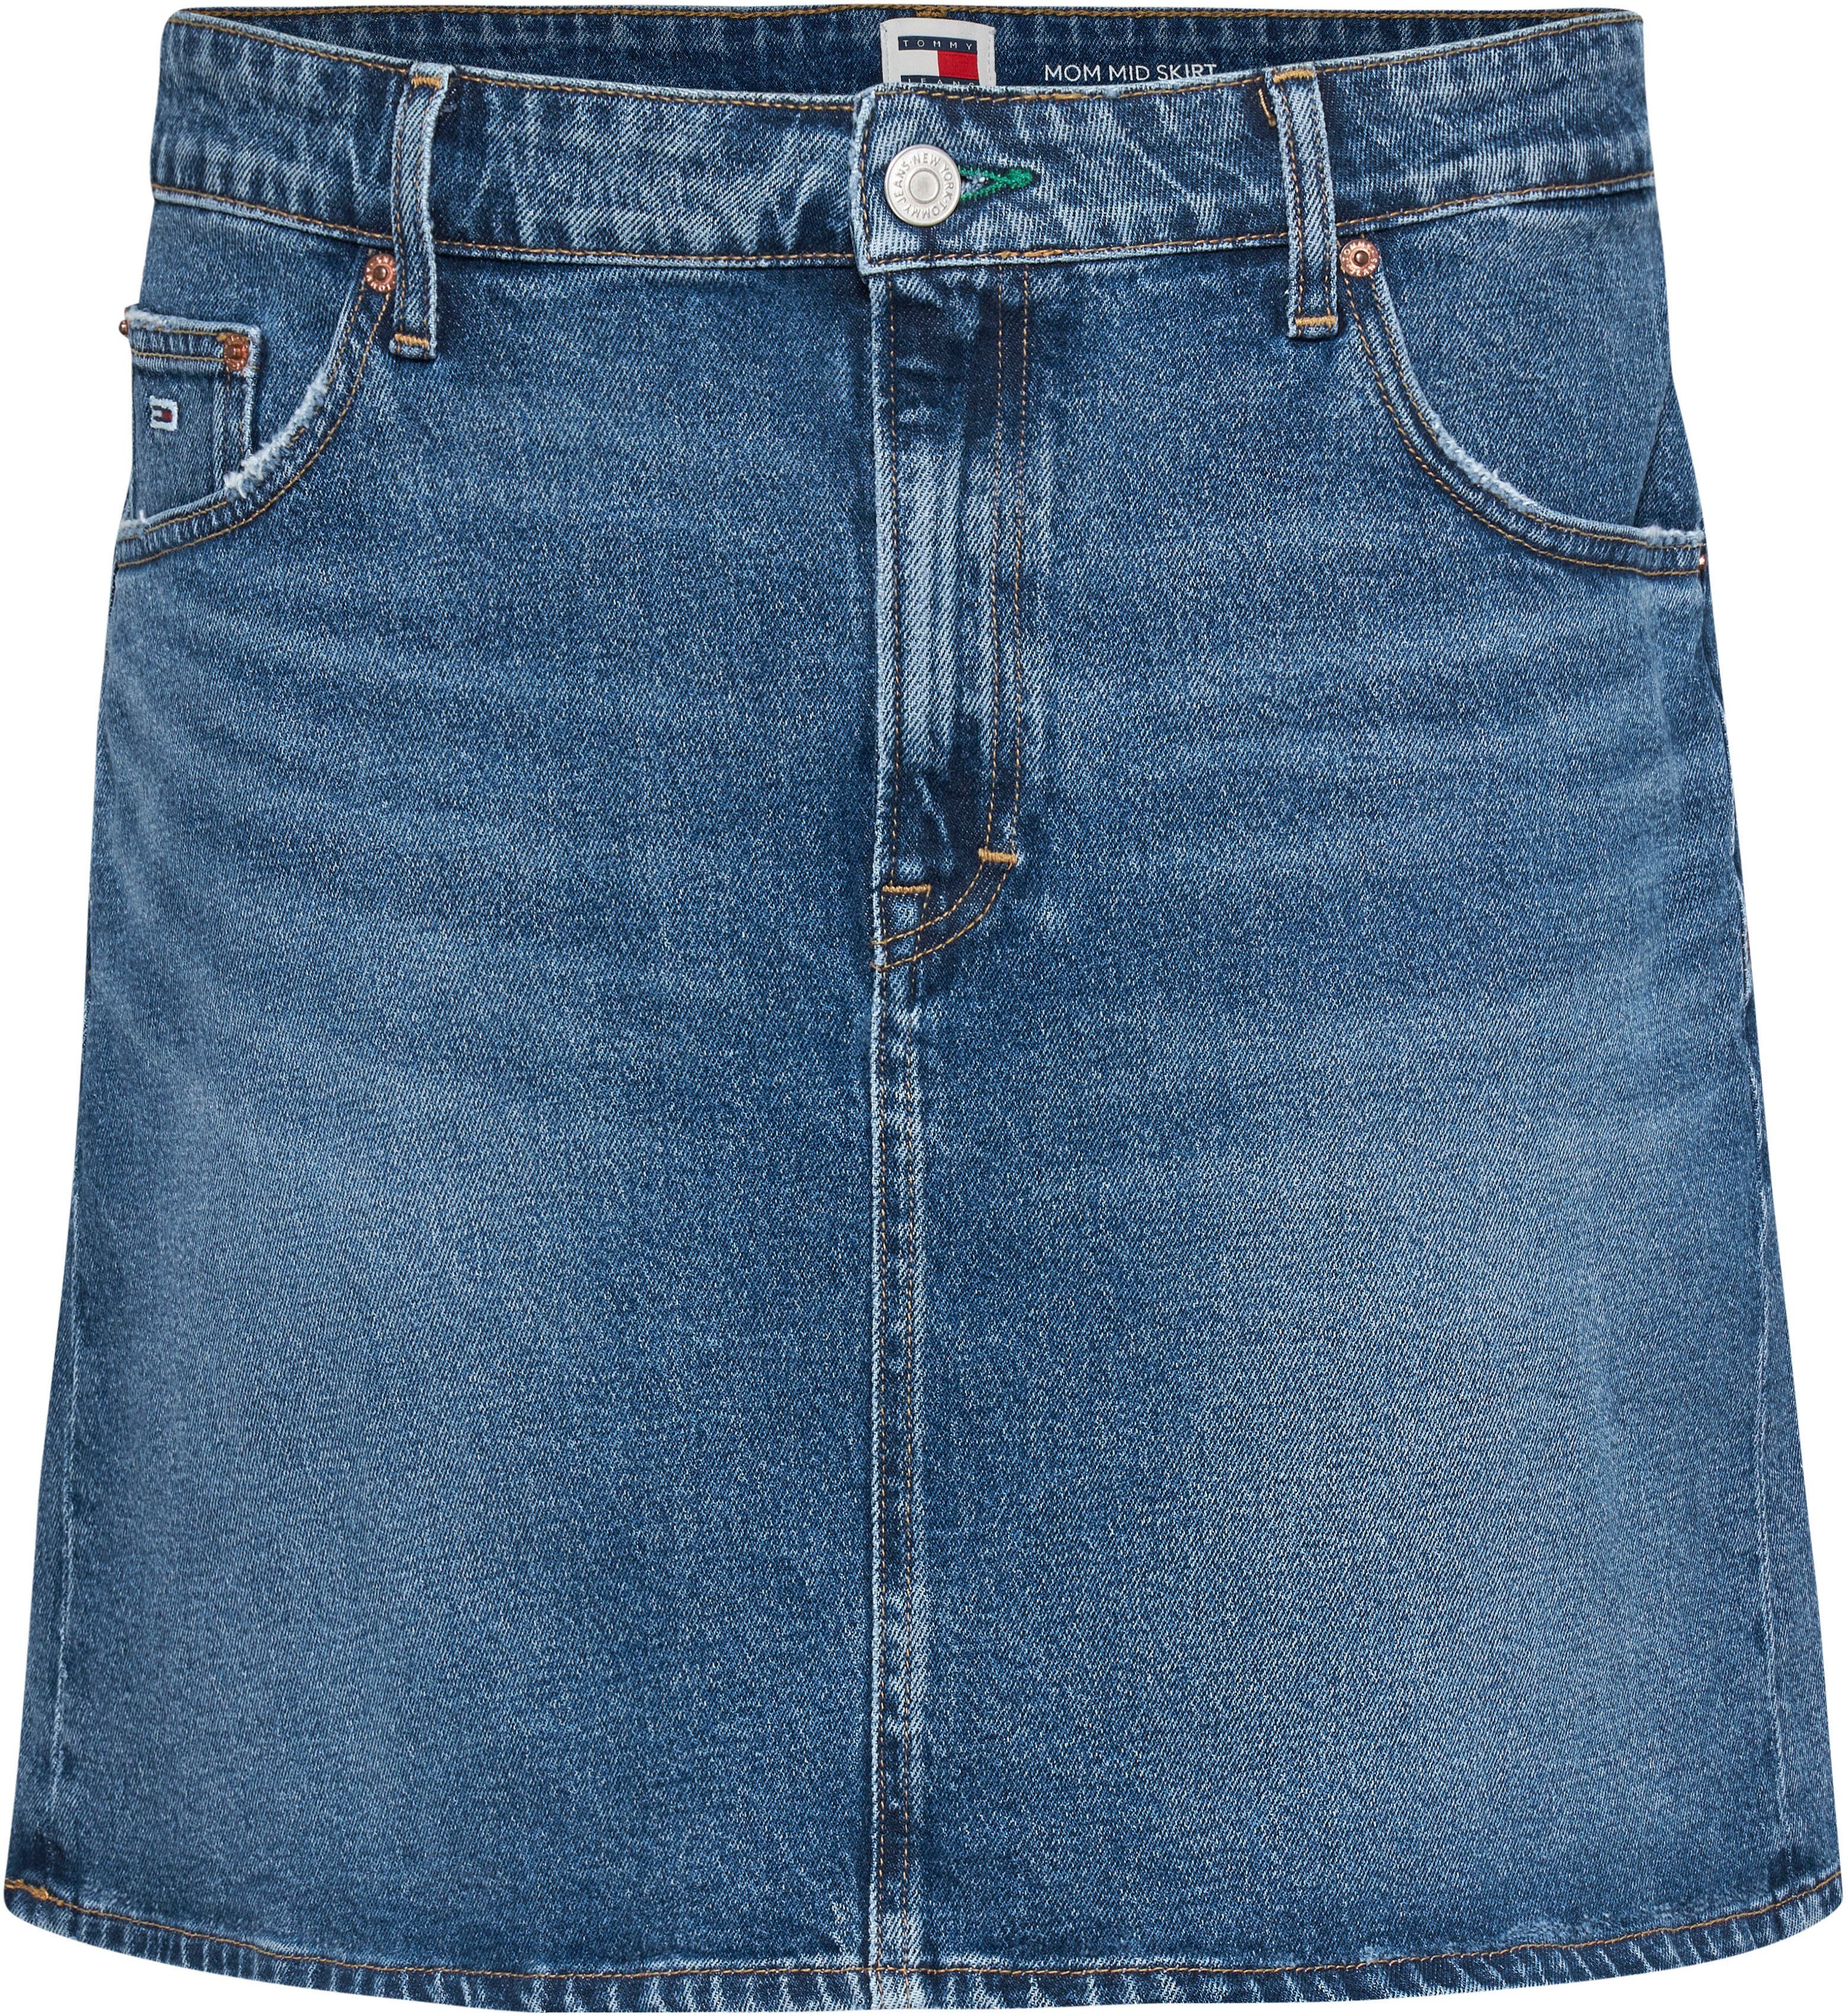 CRV Jeans Tommy UH MOM AH6158 Logostickerei Curve mit SKIRT Jeansrock